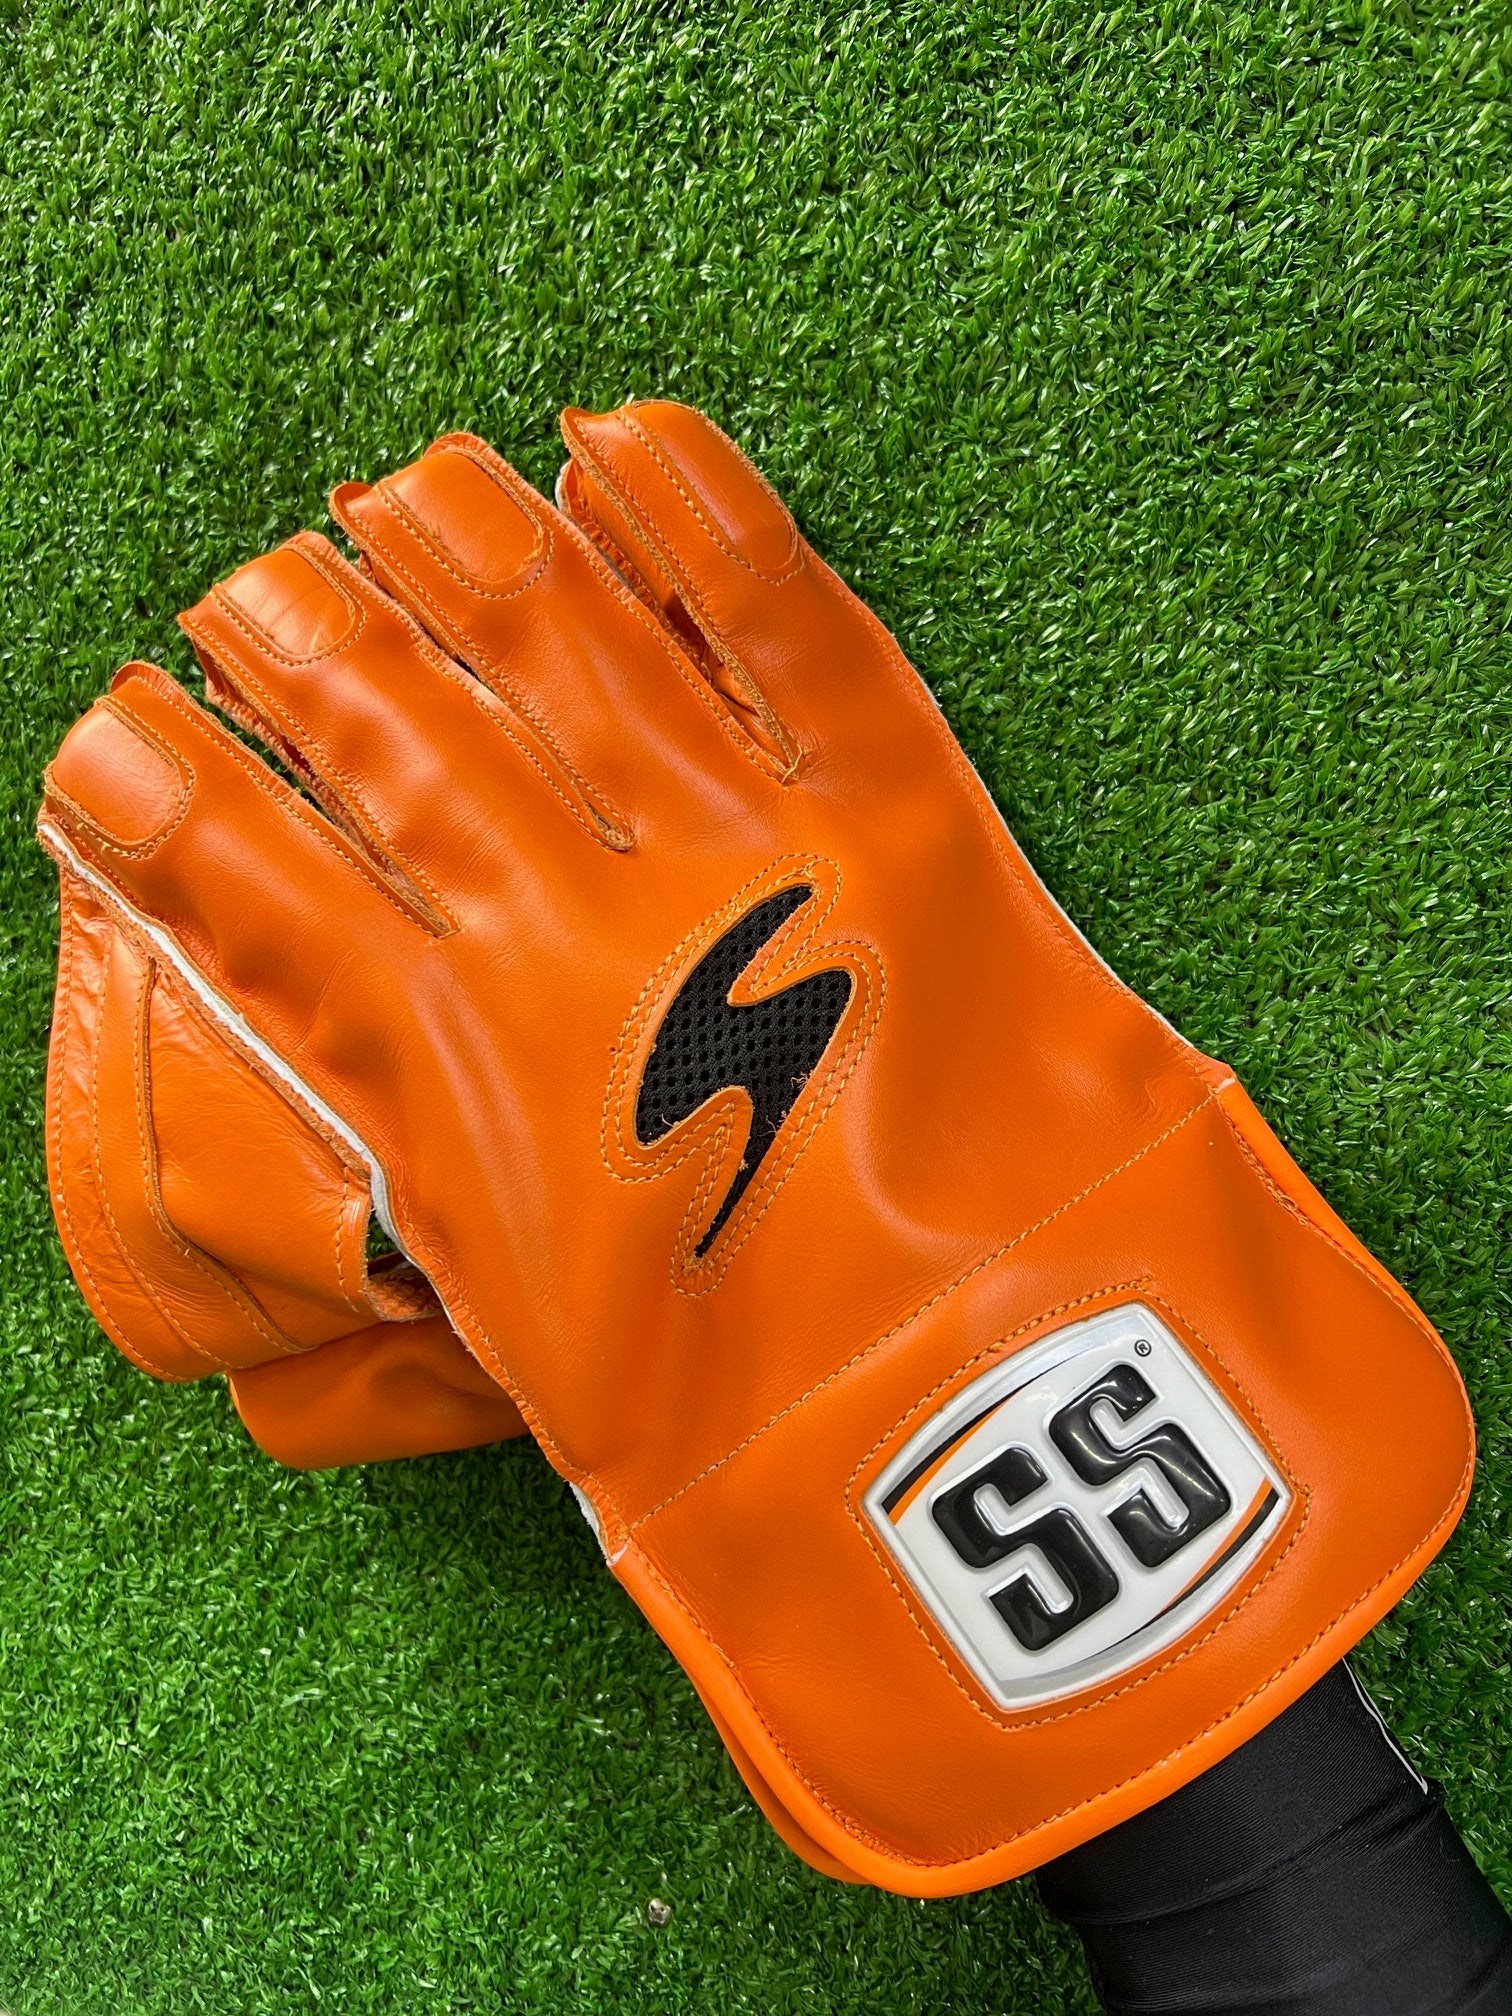 SS MSD Dhoni Orange Players Wicket Keeping Gloves - 2024